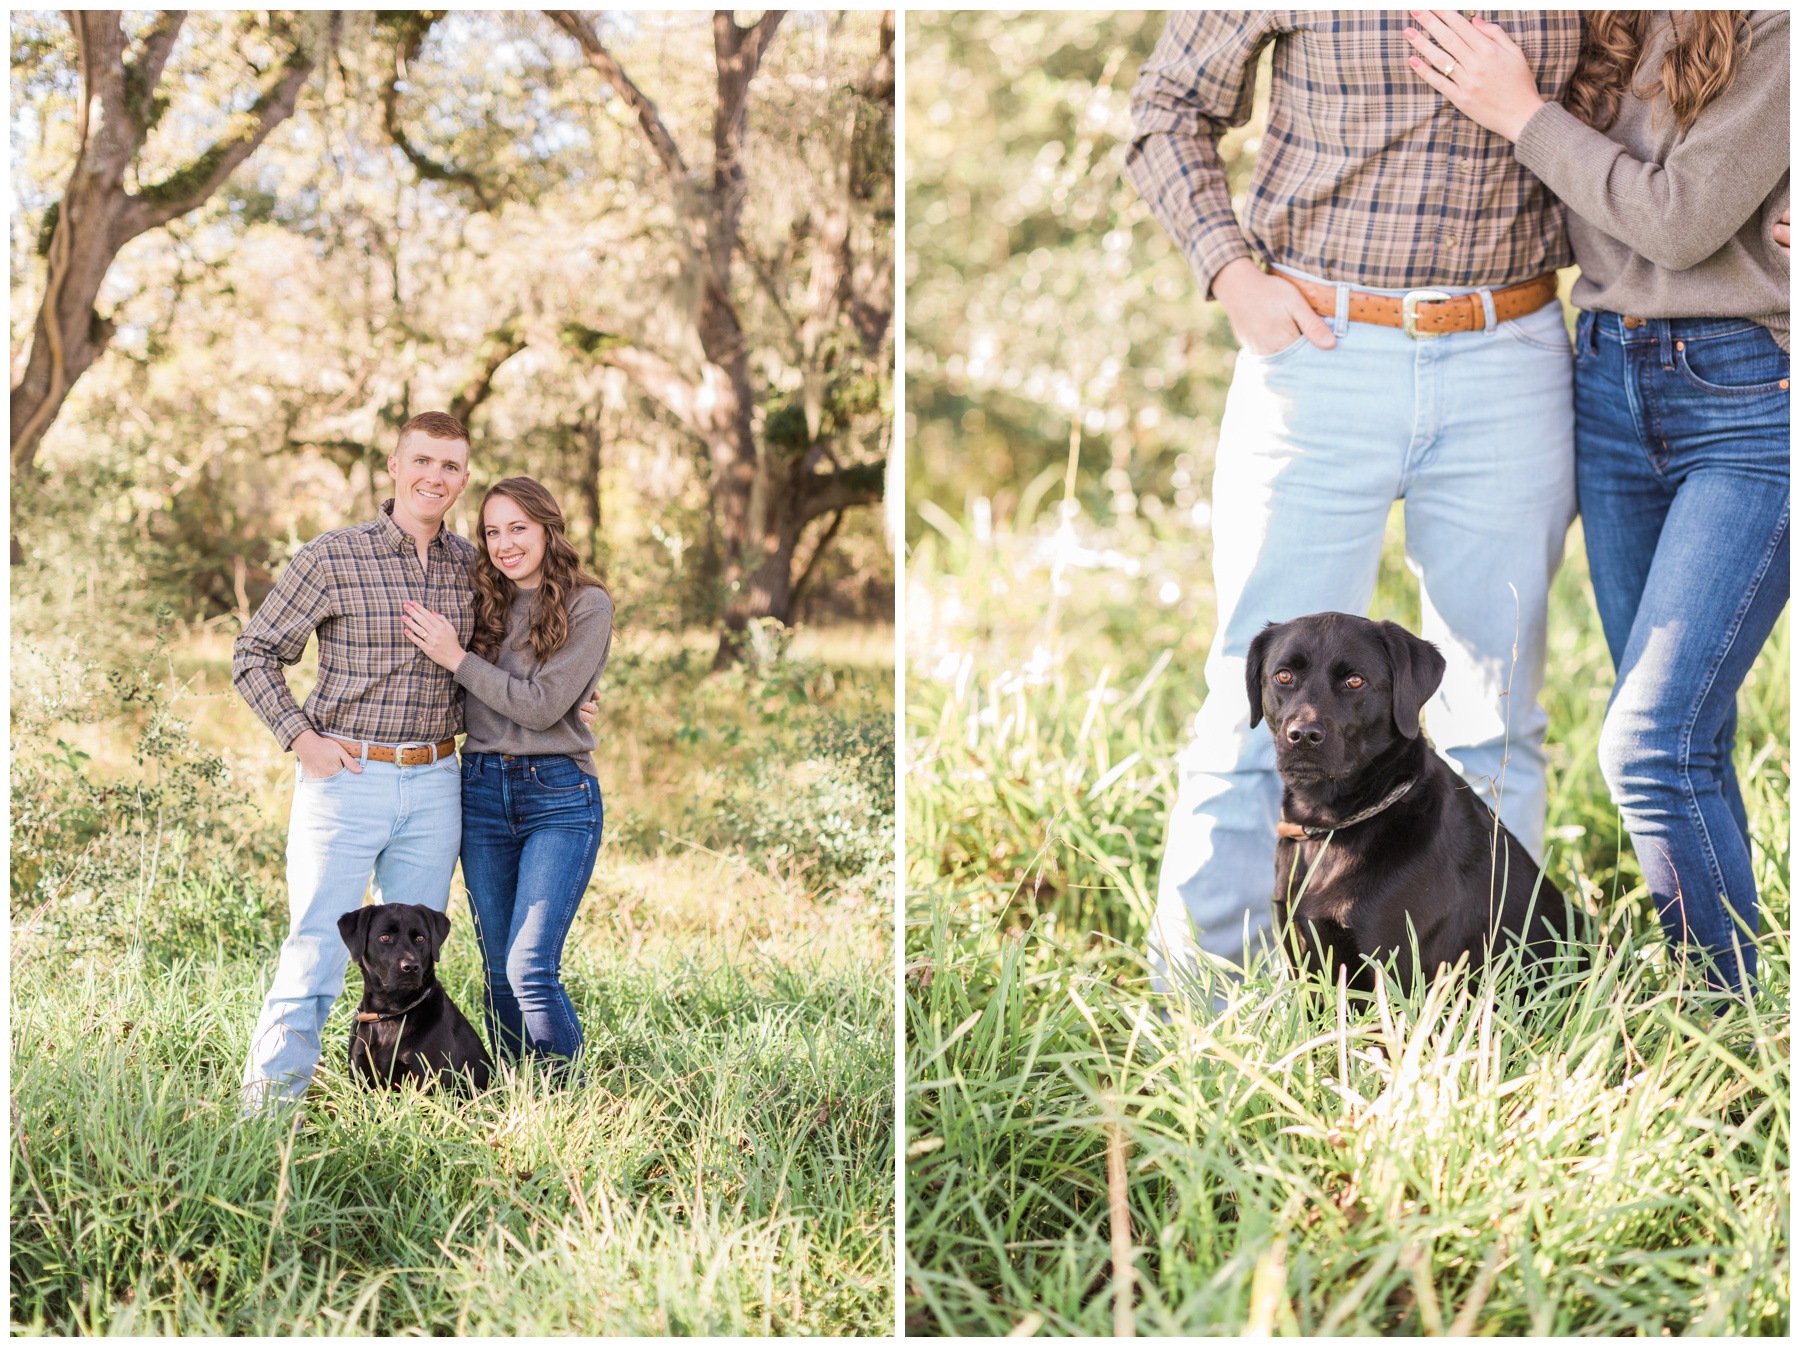 Engagement session at Brazos Bend State Park